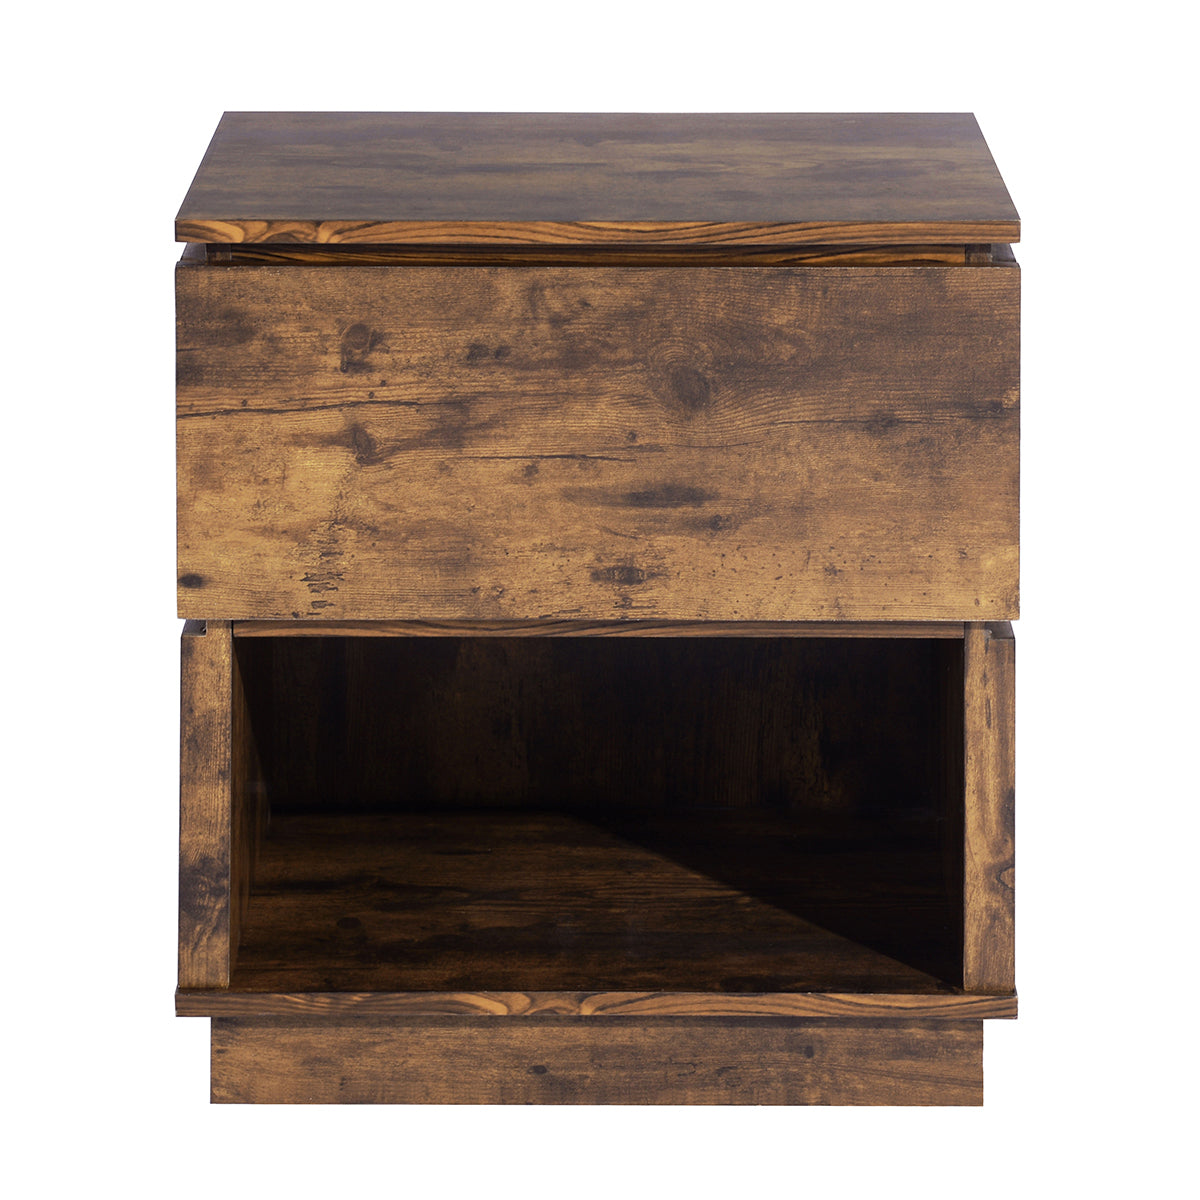 Wooden Night Stand